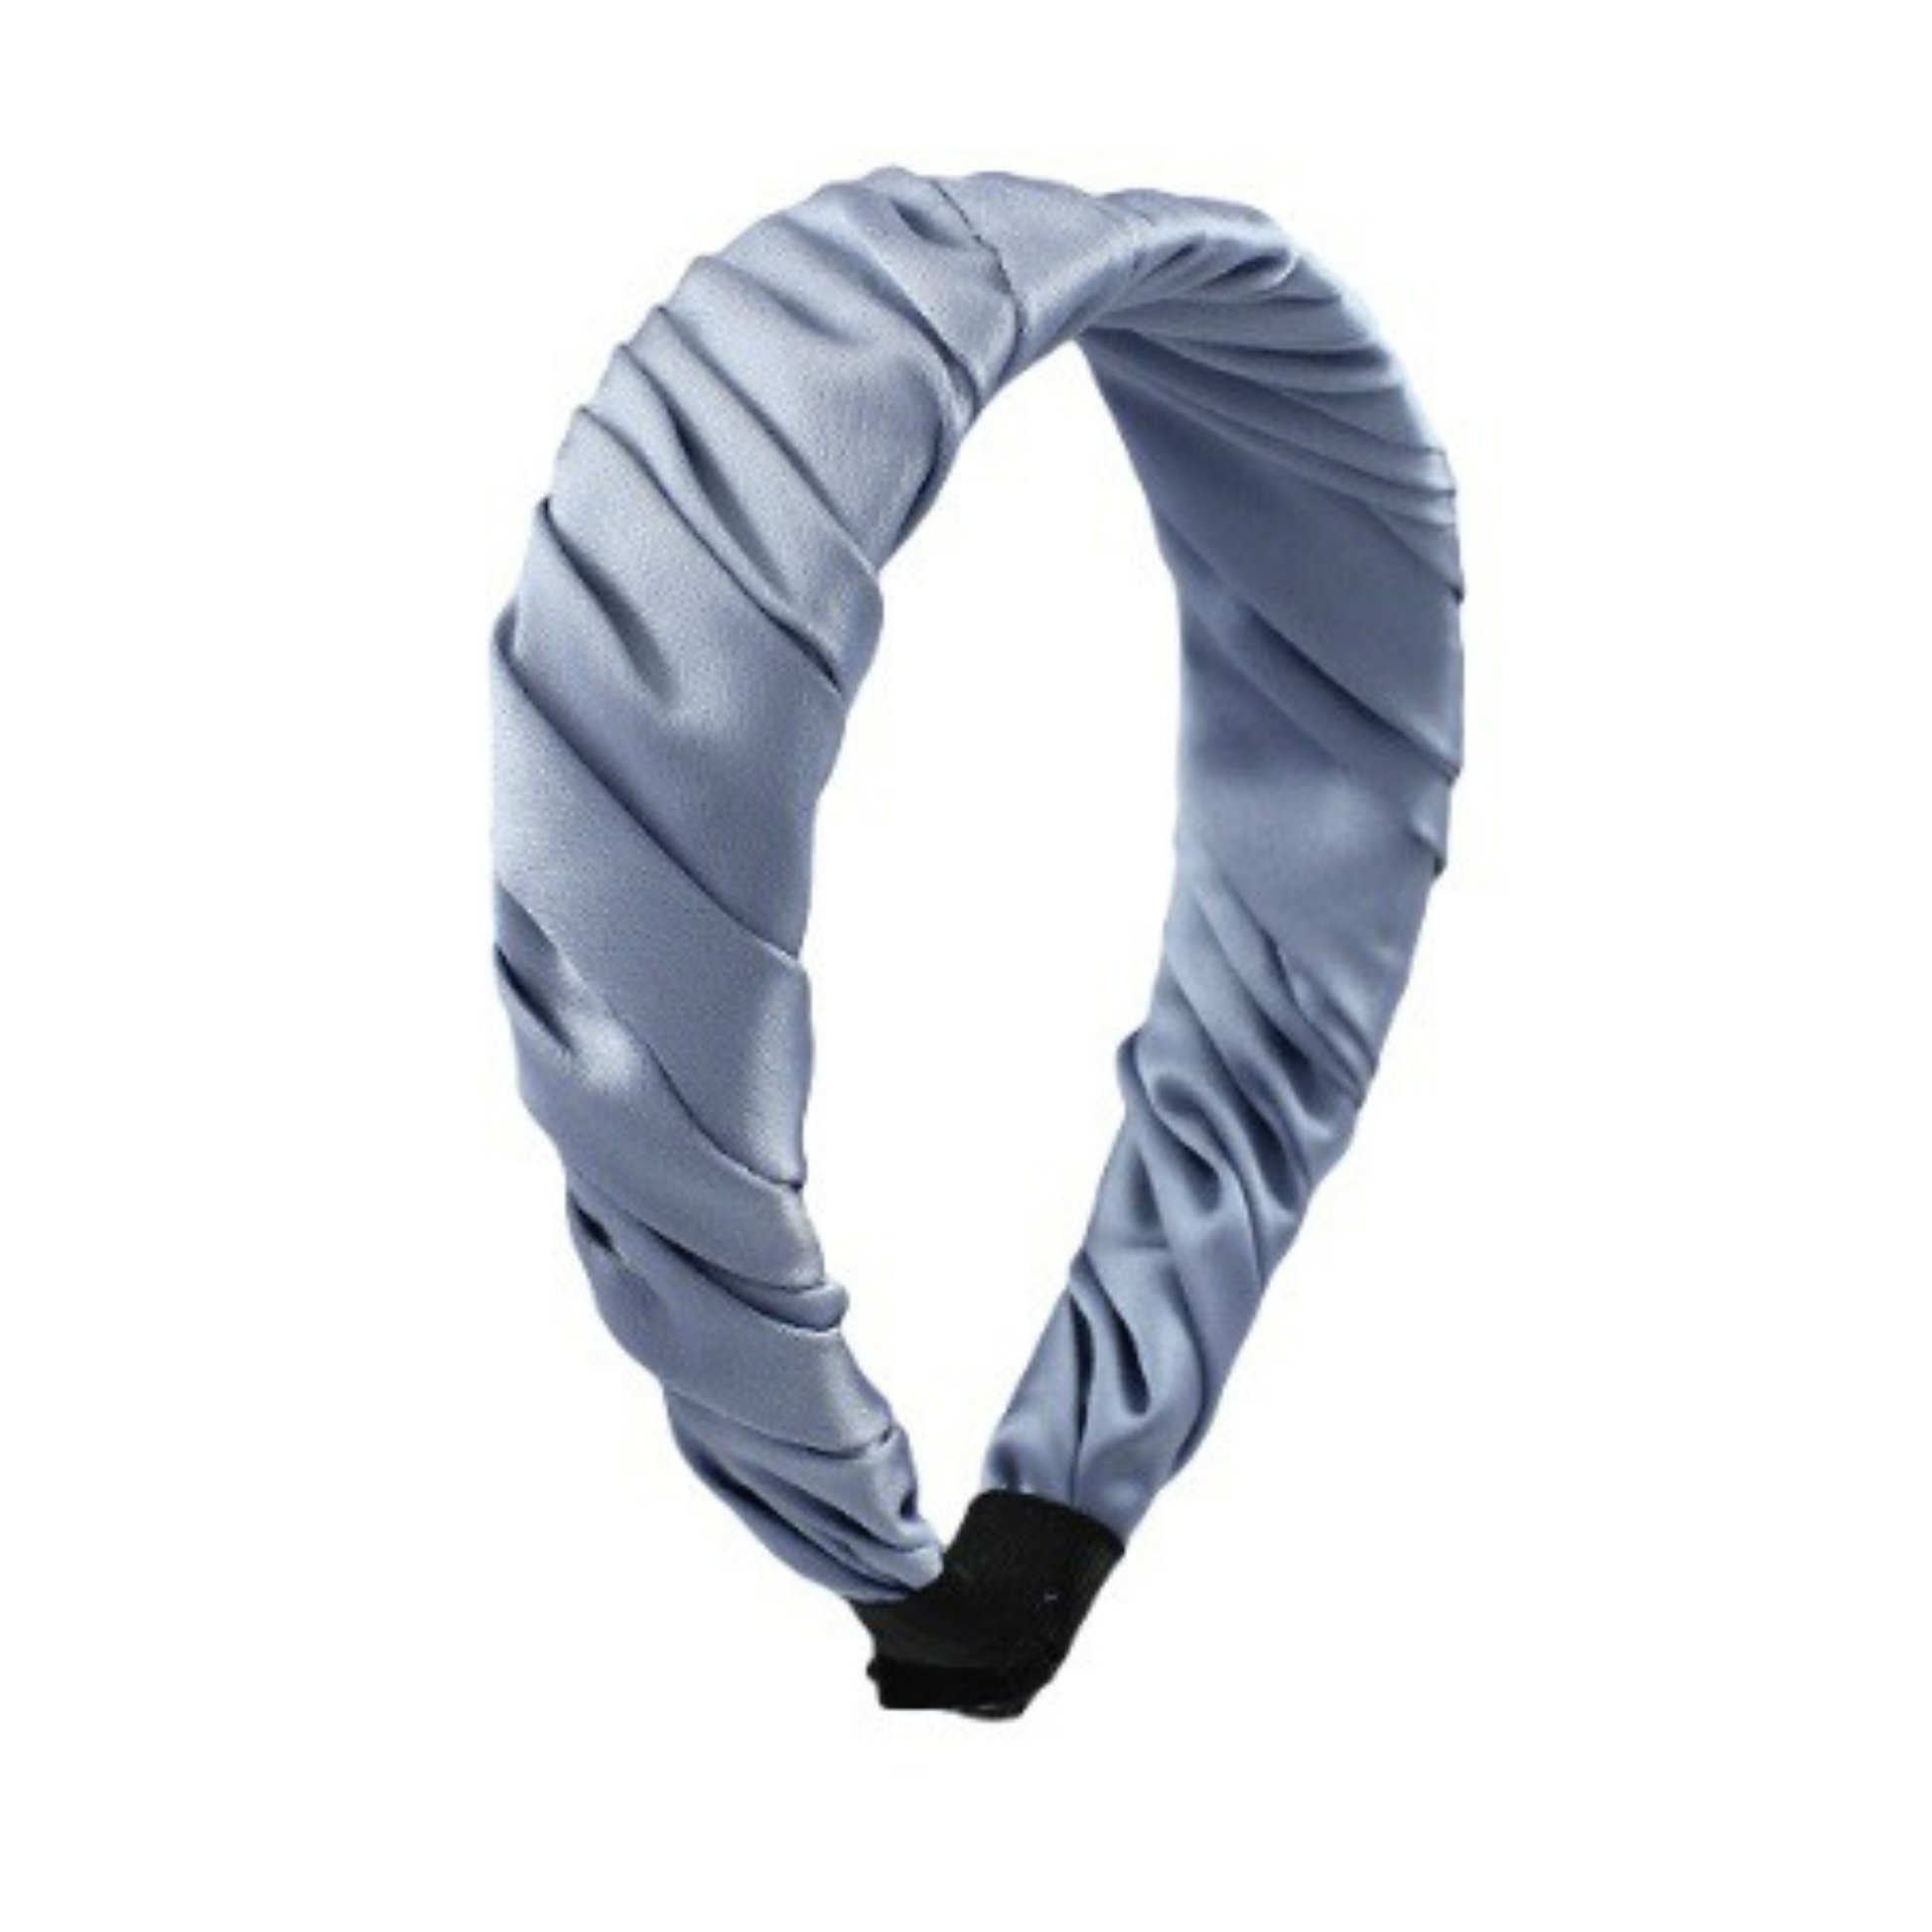 This comfortable fabric wrapped headband comes in two gorgeous colors - a soft pink, and a stylish blue. Boasting a fashionable and elegant look, this accessory is both a stylish and reliable choice for any occasion.